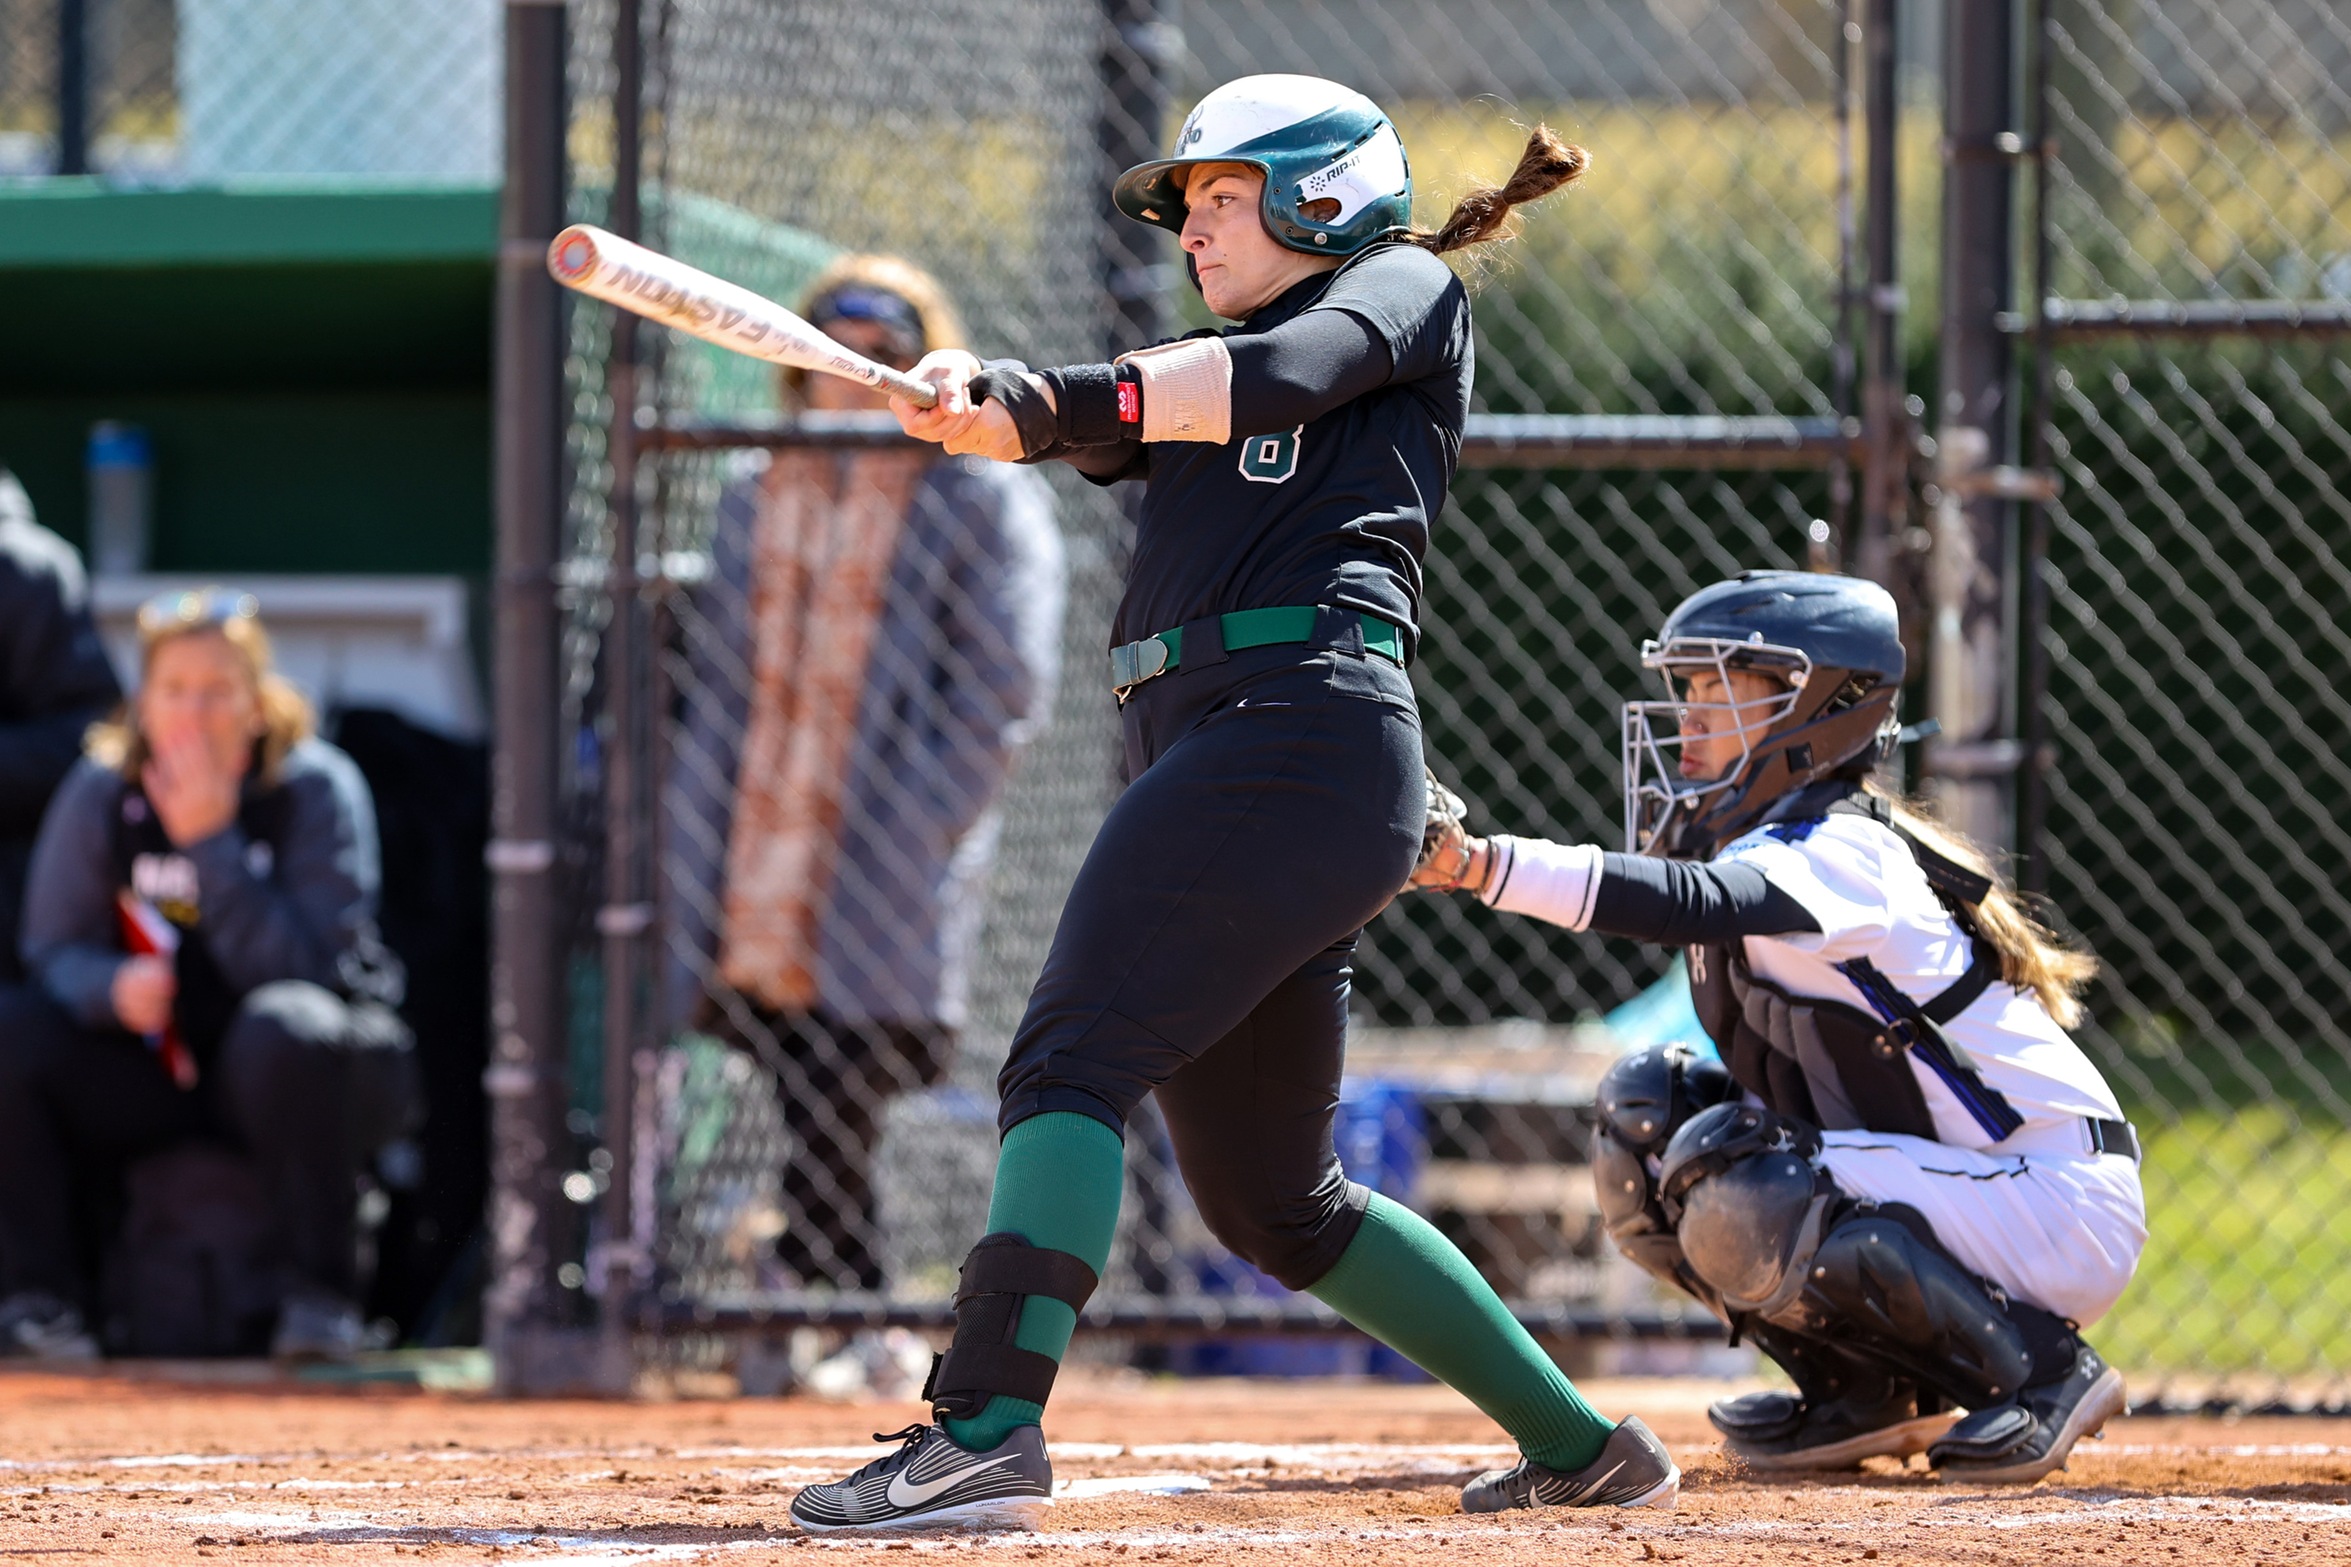 After three home run weekend, Fernette named Horizon League Player of the Week